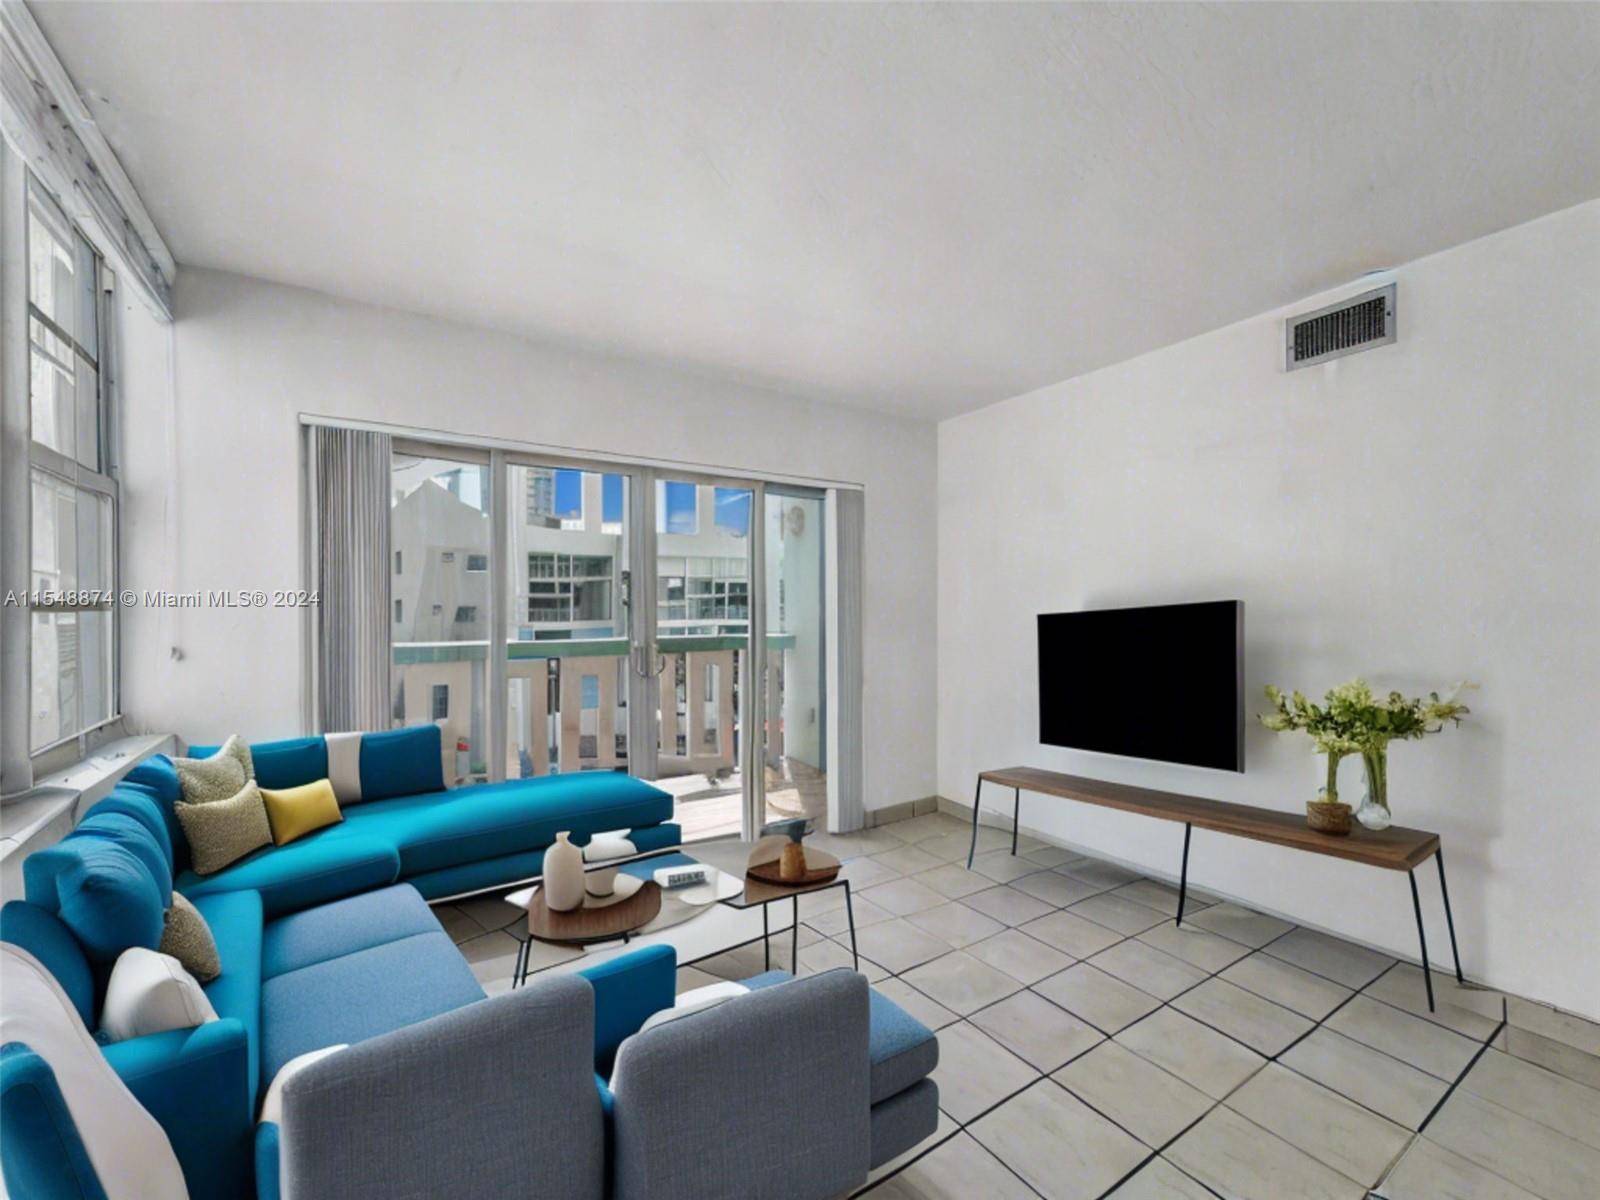 Discover the epitome of South Beach living in this exquisite 2 Bed 2 Bath Art Deco condo, spanning over 1000 total sqft.